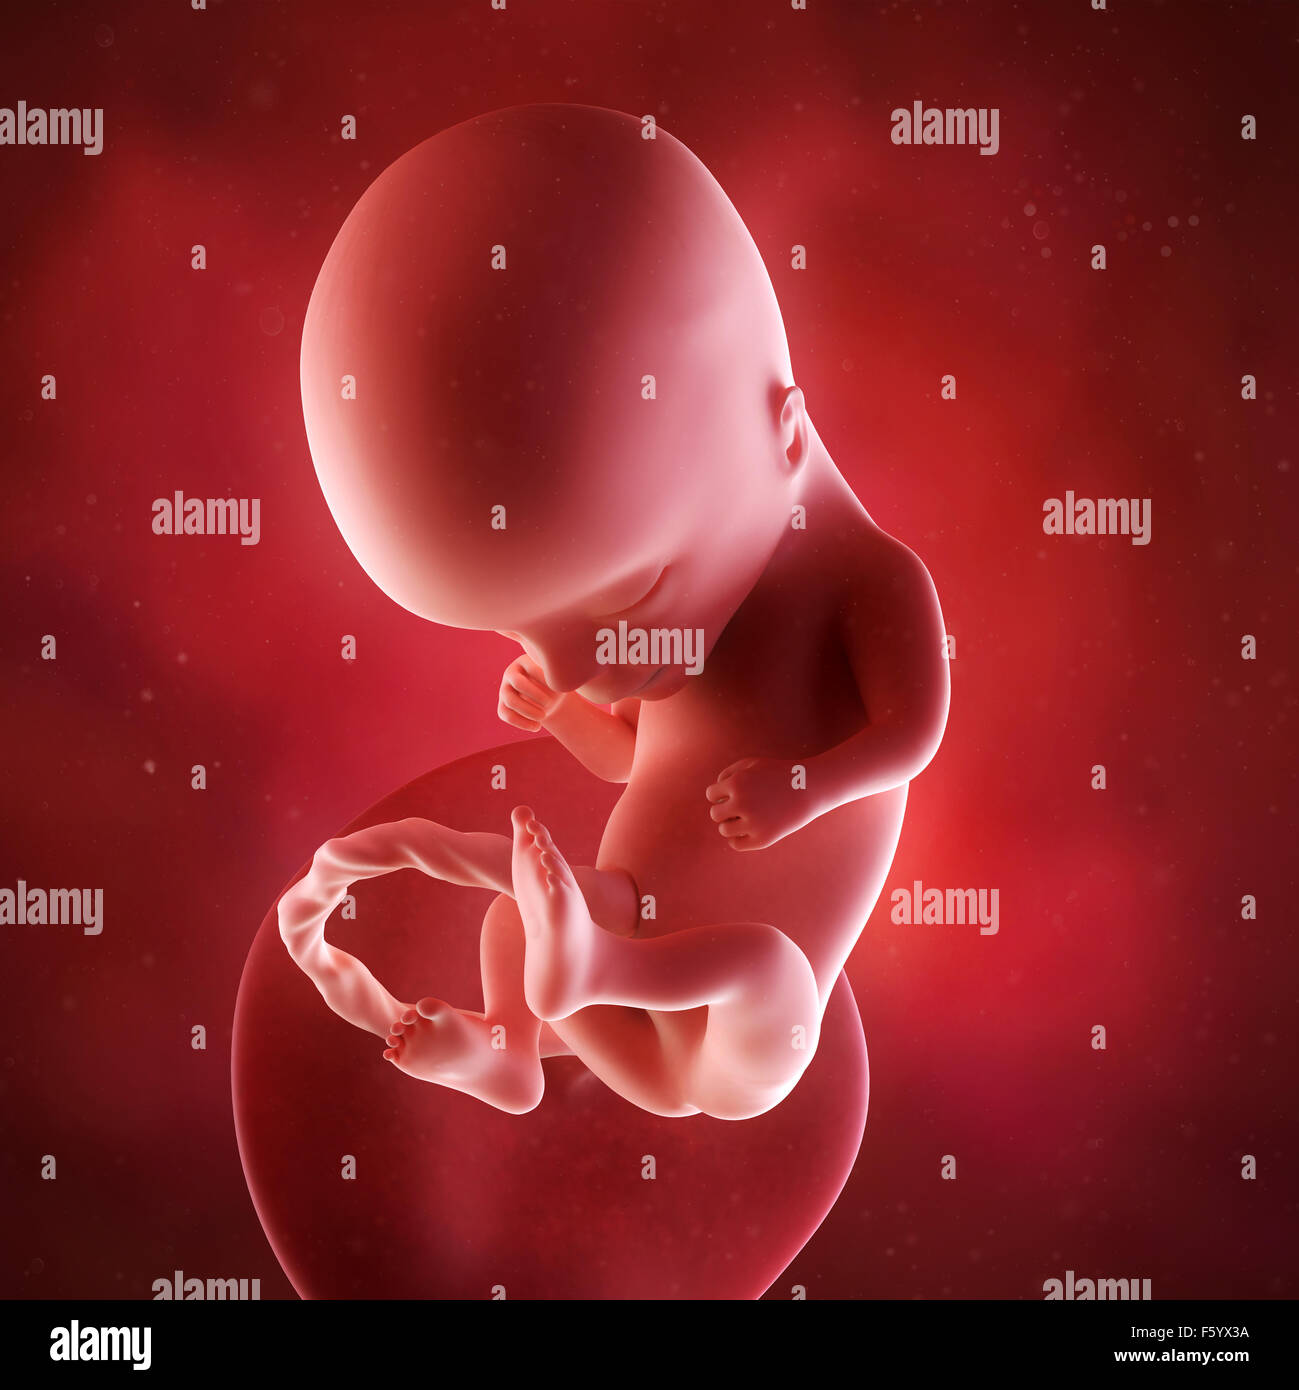 medical accurate 3d illustration of a fetus week 14 Stock Photo